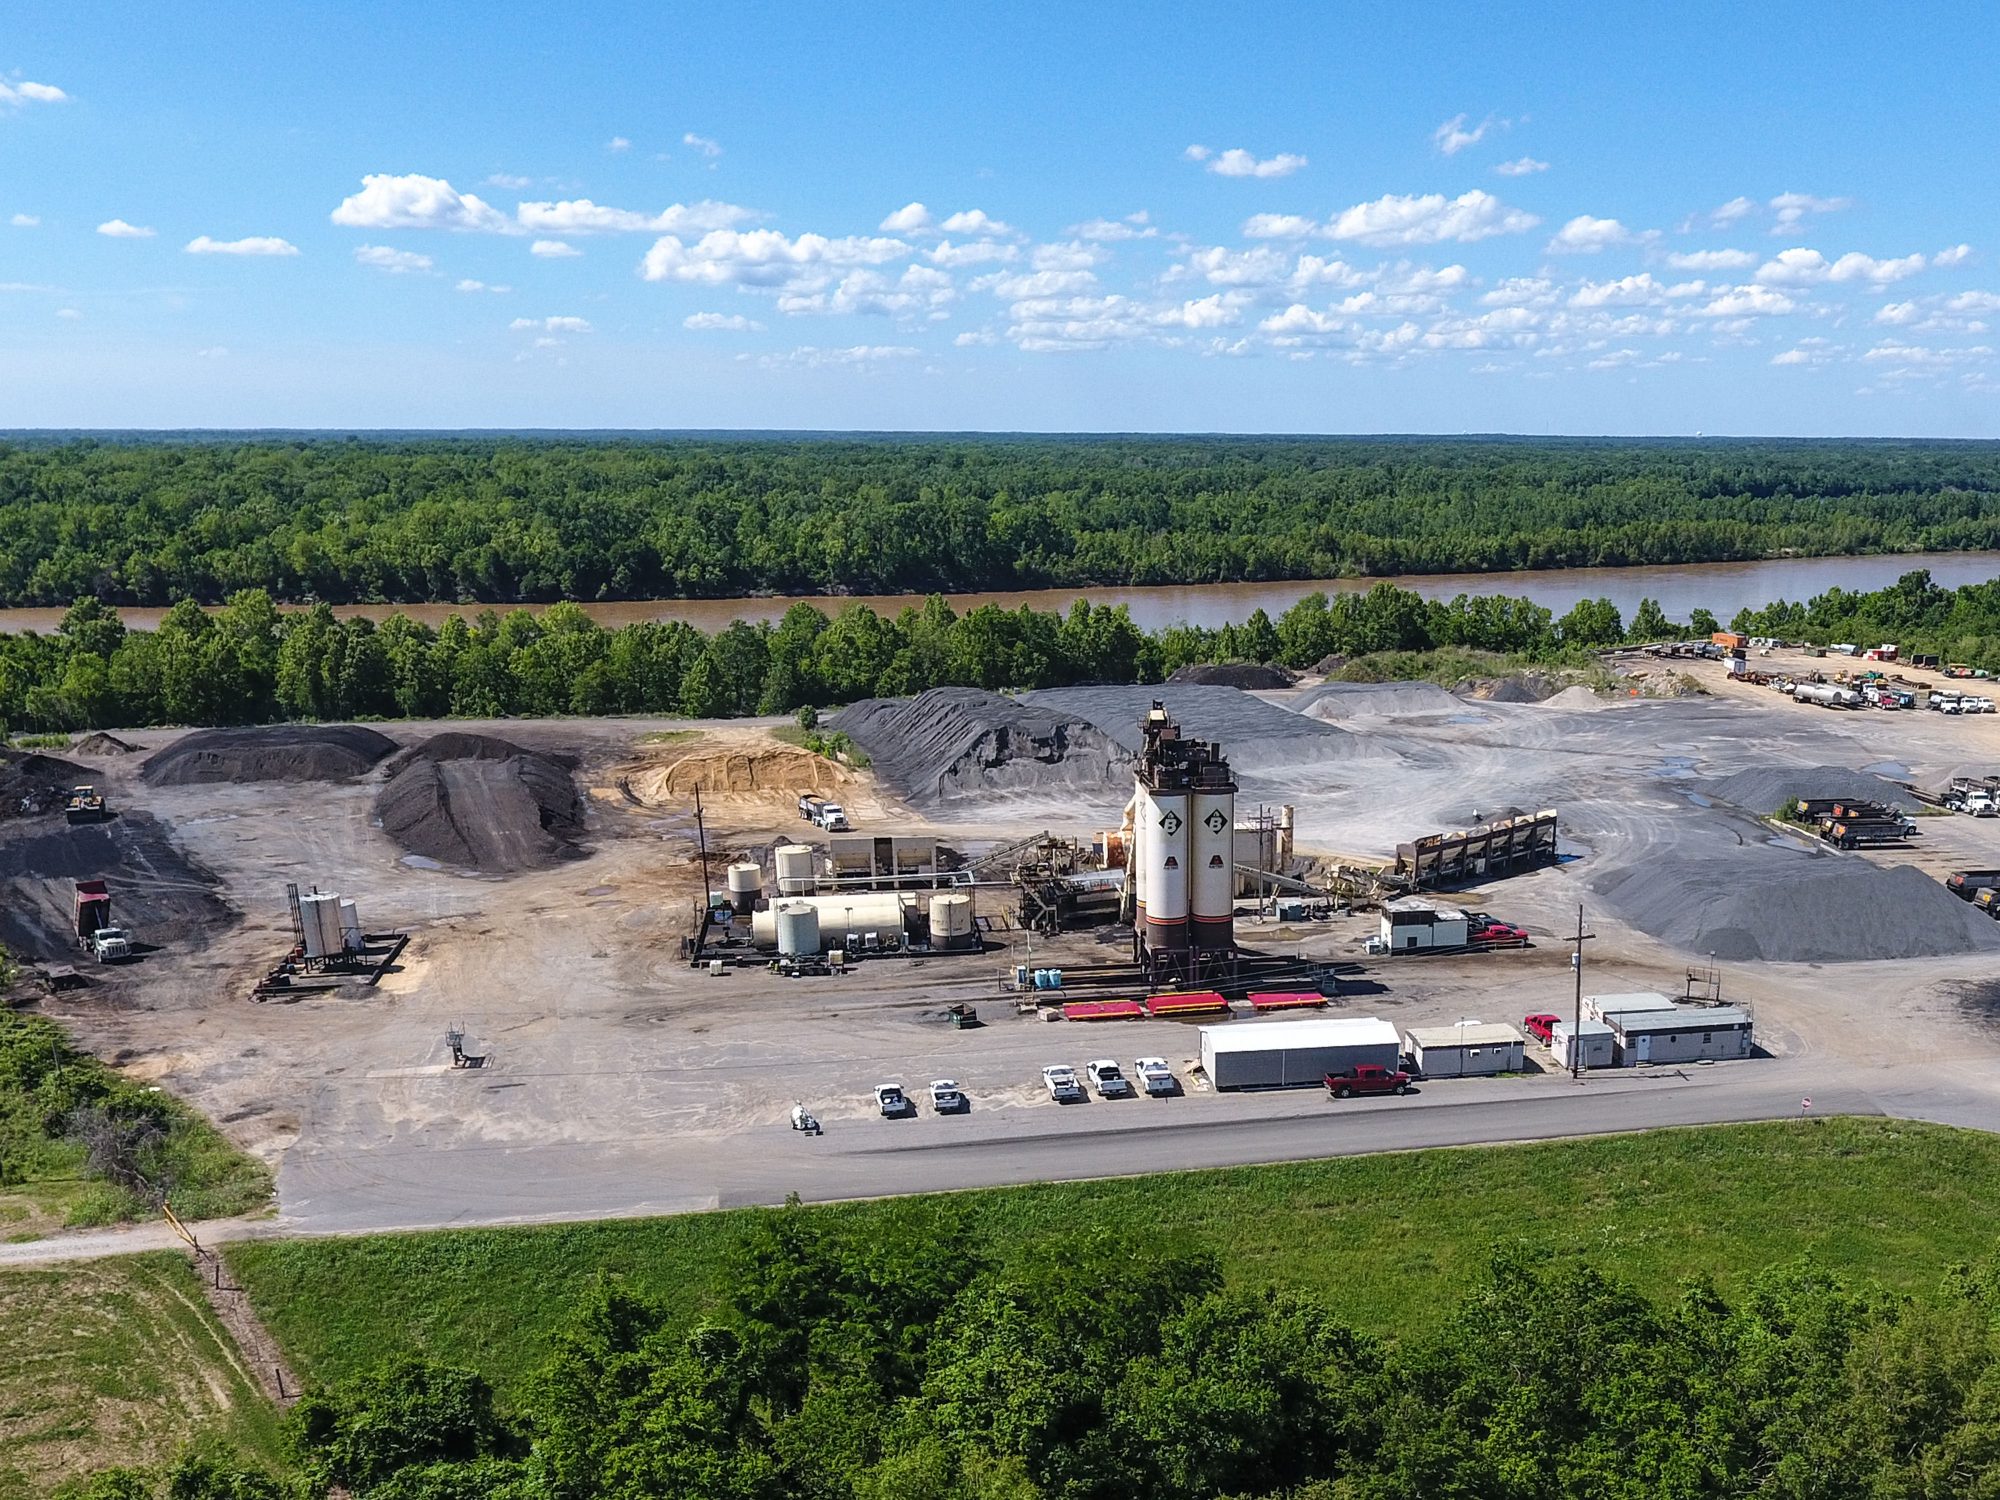 Diamond B Construction has five plants across the state of Louisiana, in Monroe, Alexandria, Leesville, New Iberia and Amite, all of which are Astec double barrel drum plants of various sizes.